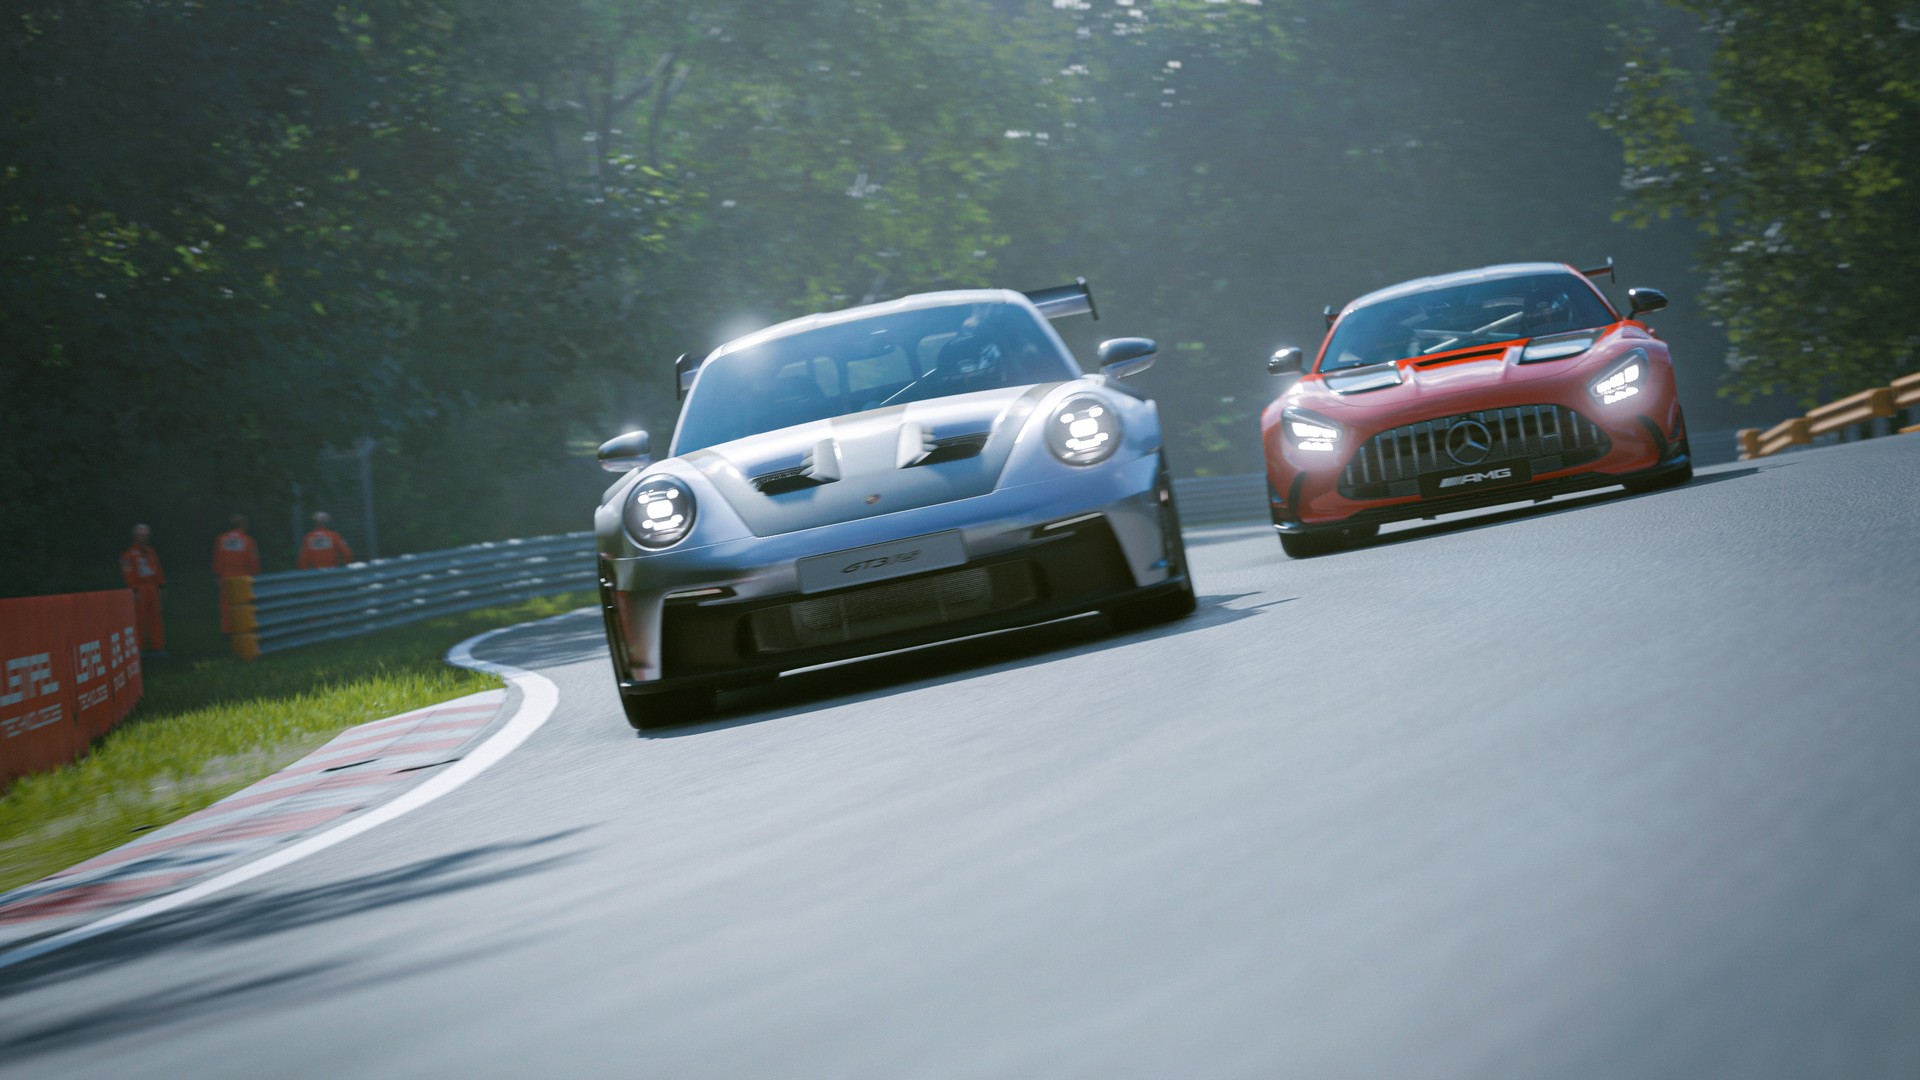 Robust Gran Turismo 7 Spec II 1.40 update introduces new cars, track,  features, 4-player split screen for PS5, and more. Live now. Full…